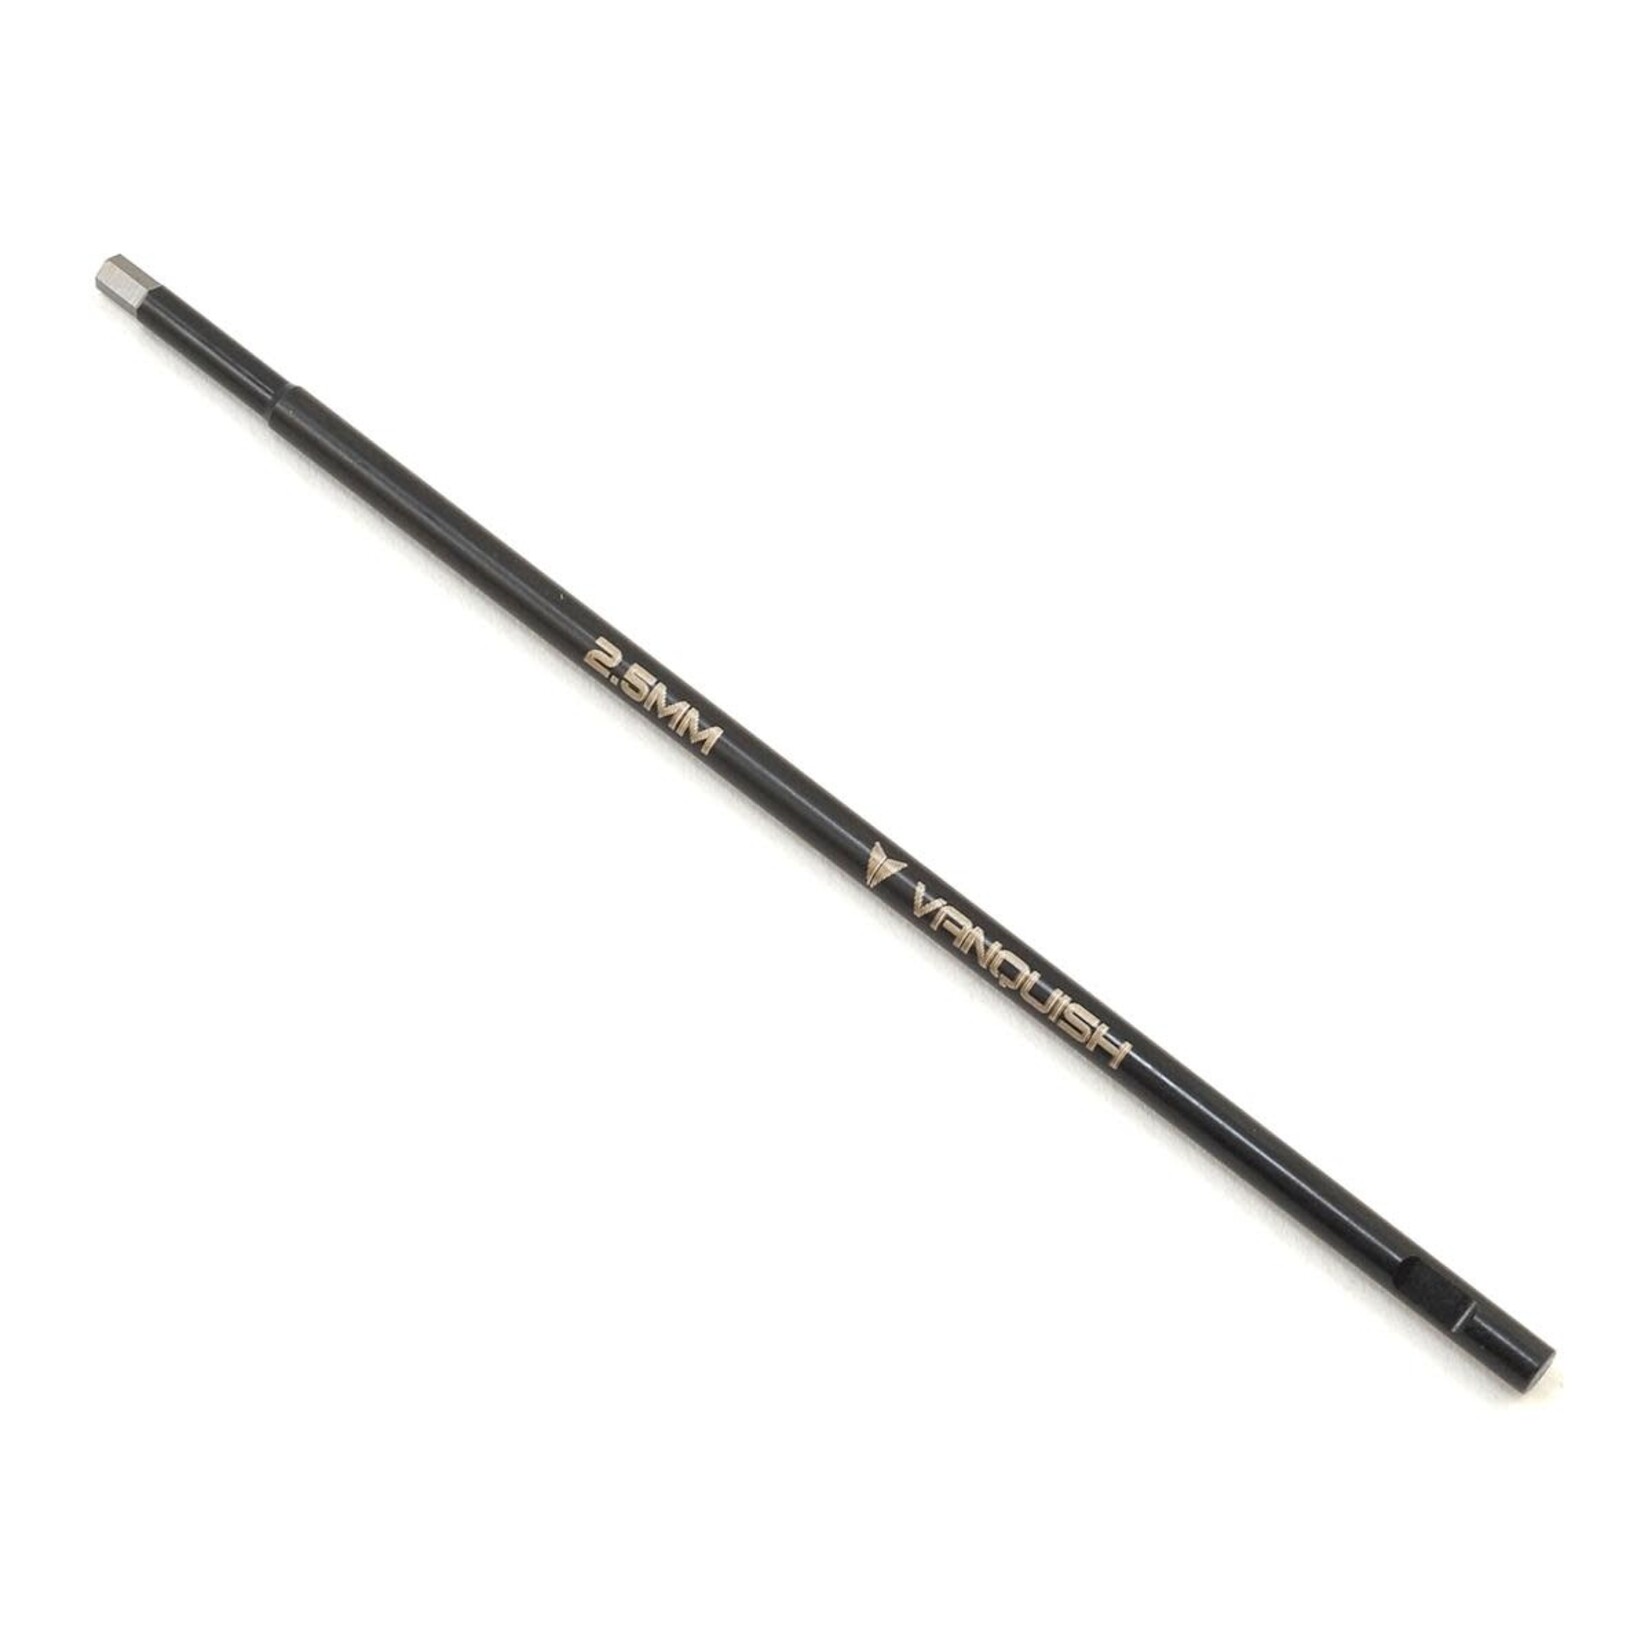 Vanquish Products Vanquish Products Replacement Hex Tip (2.5mm) #VPS08403